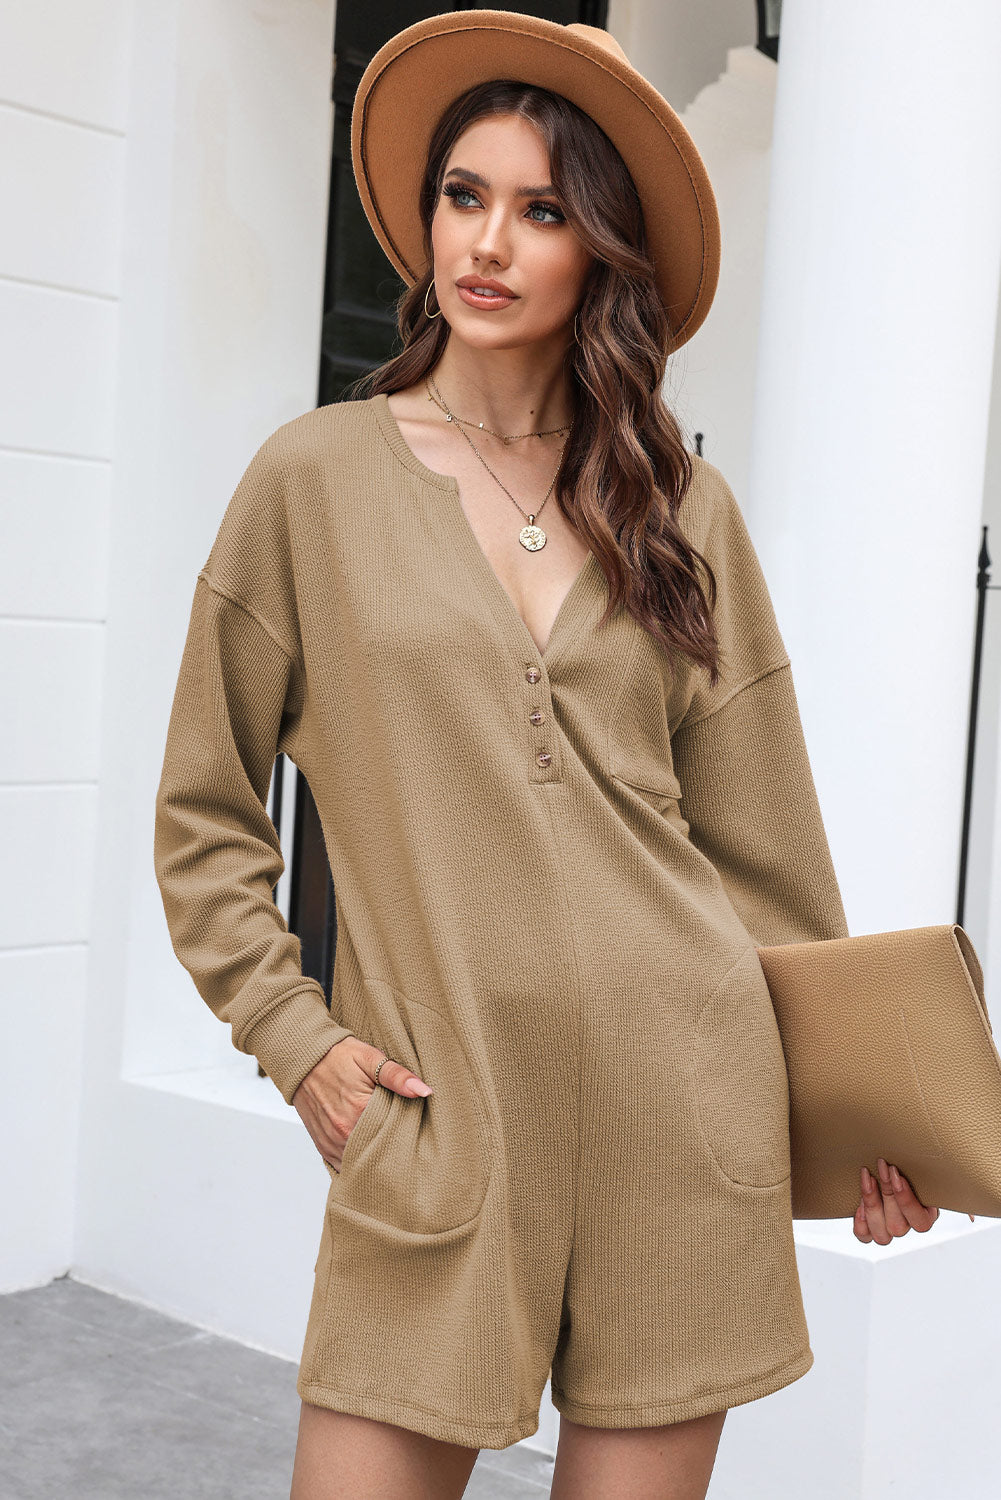 Notched Neck Long Sleeve Romper